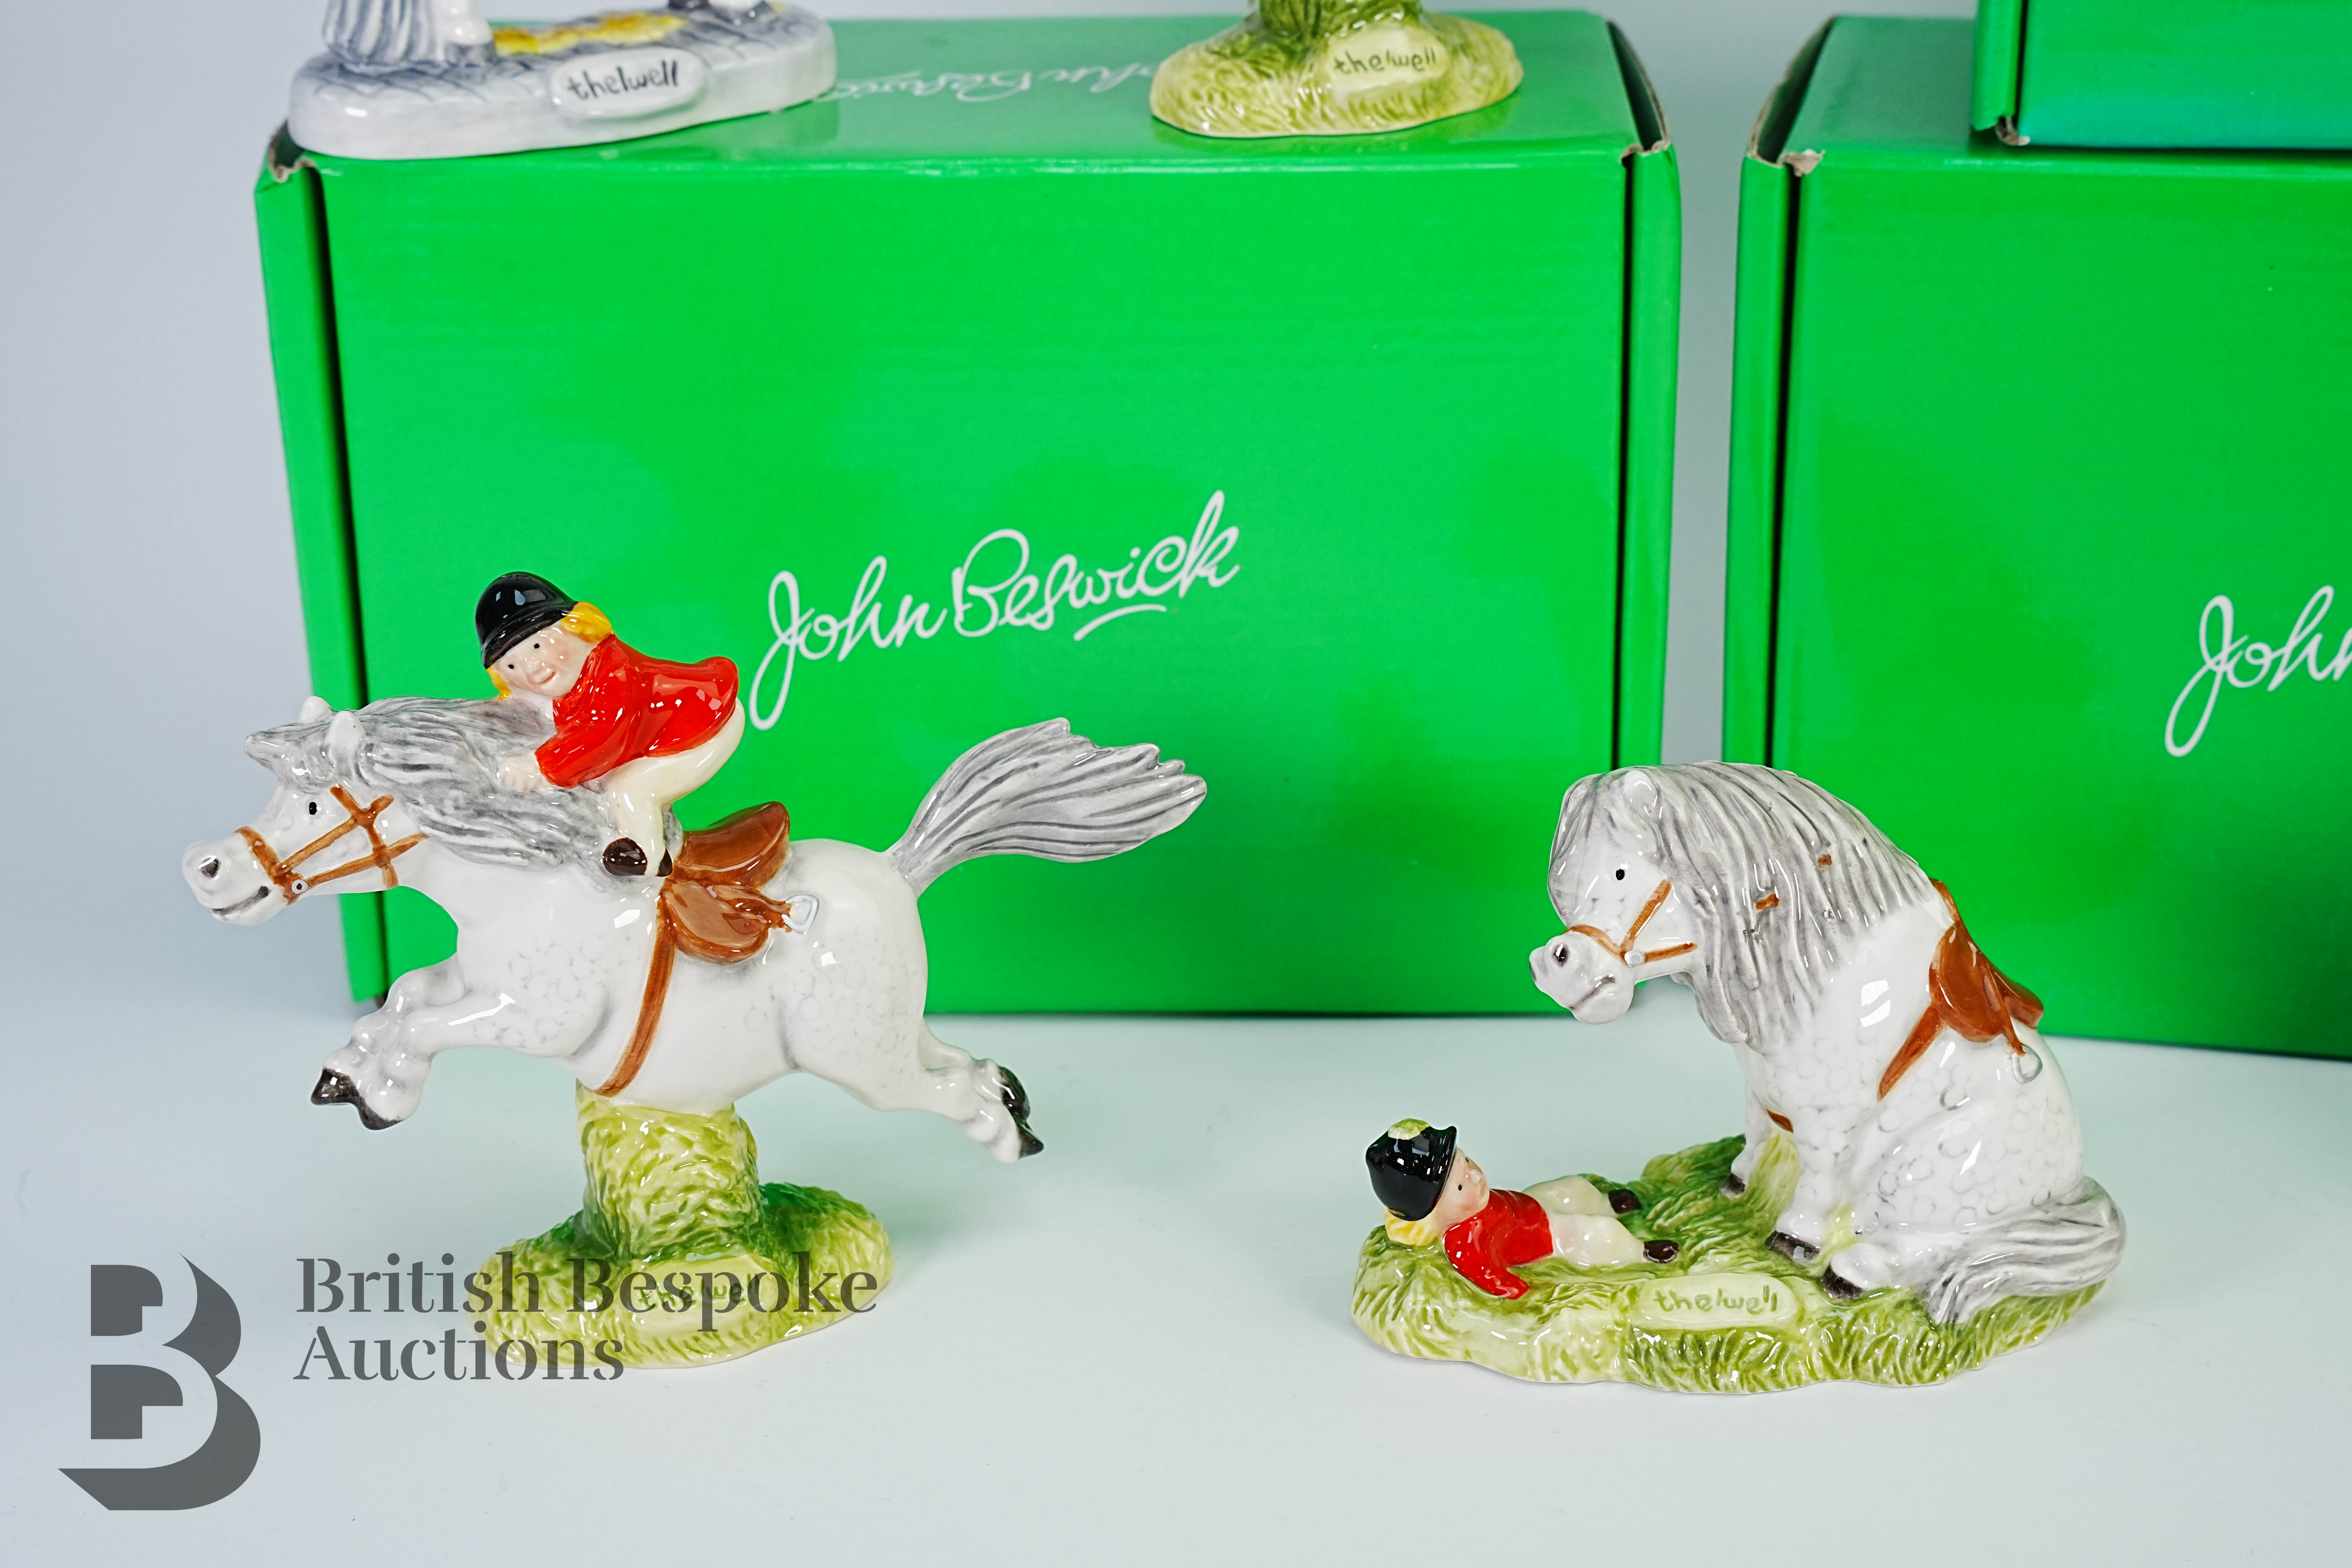 John Beswick Hand Painted Norman Thelwell Figurines - Image 3 of 6